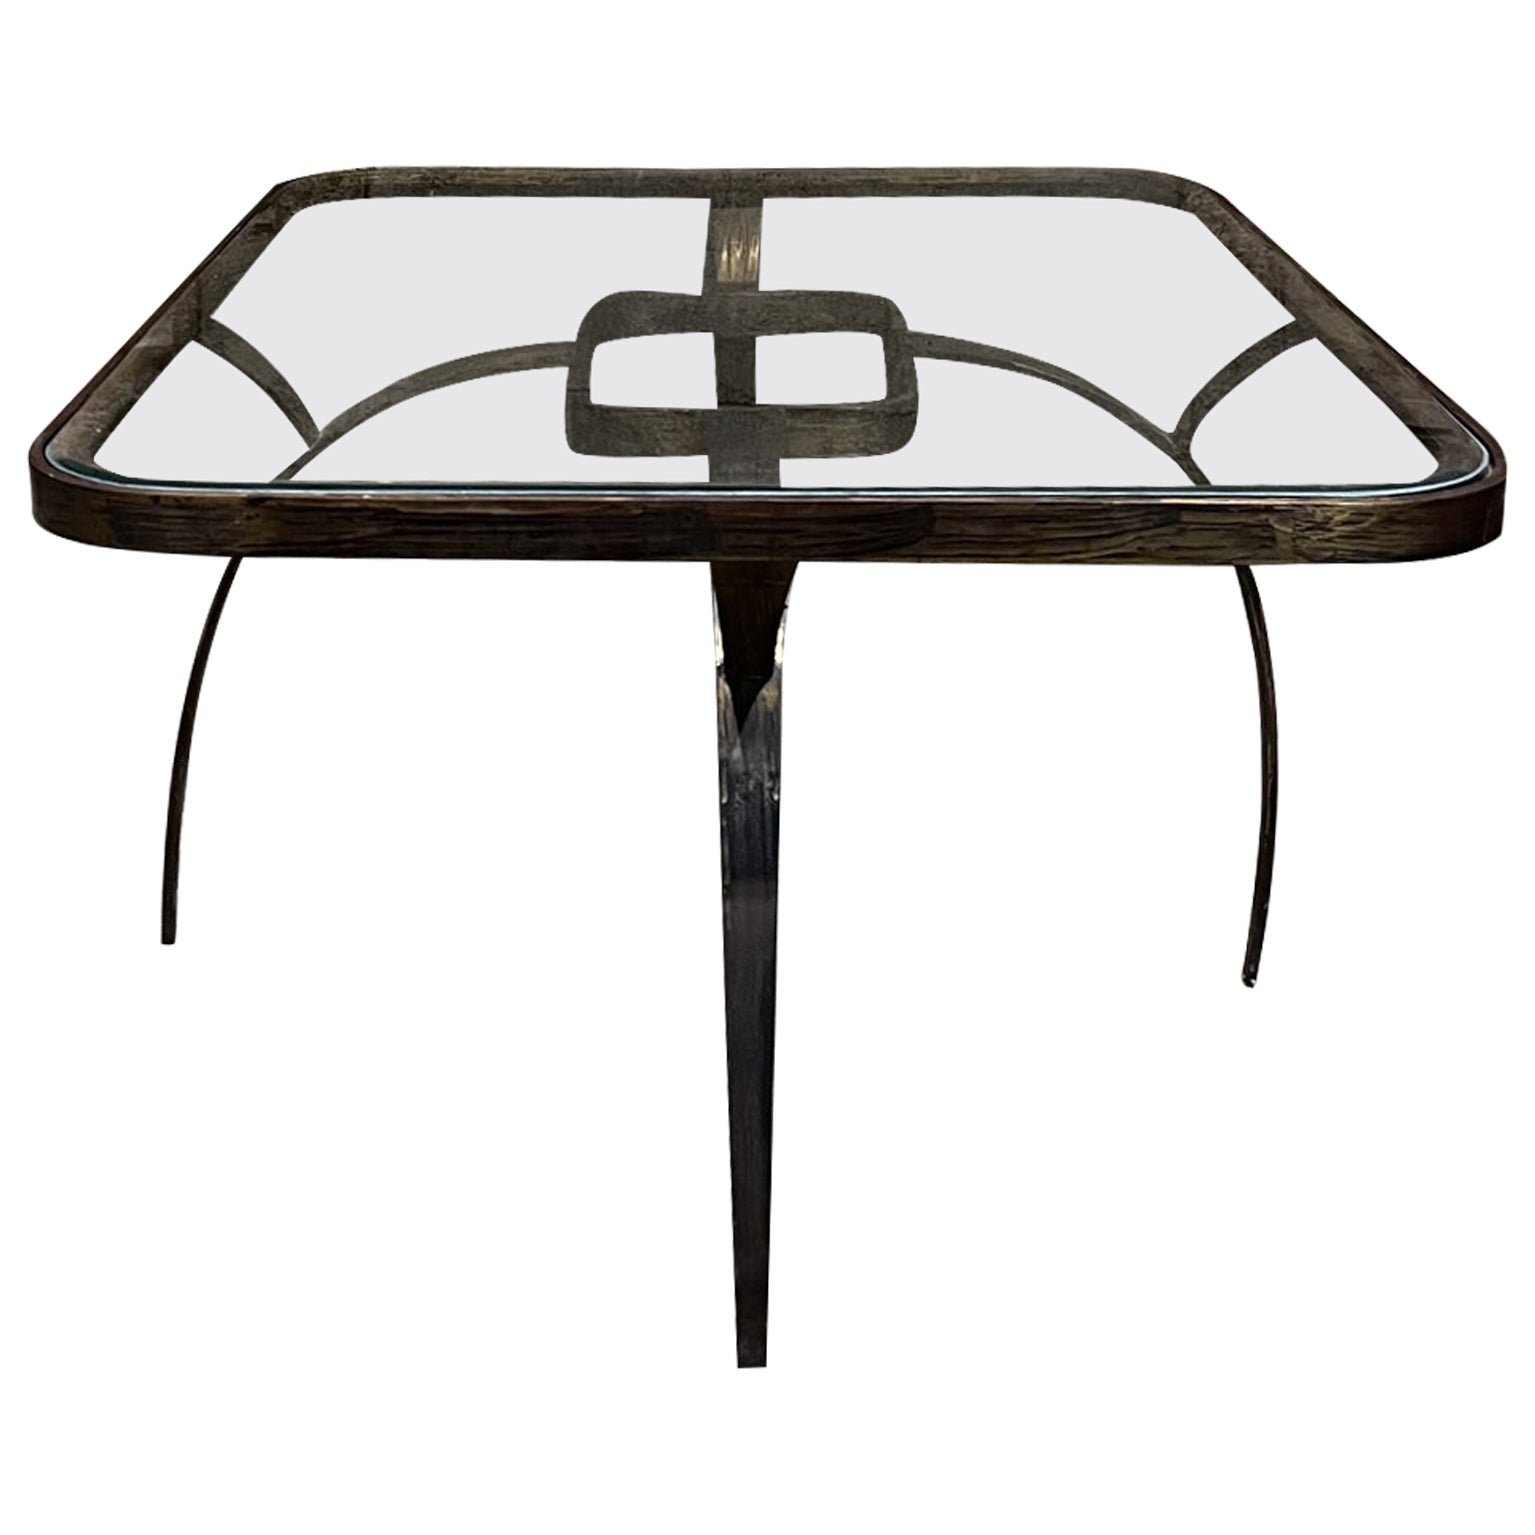 1950s Sculptural Bronze Coffee Side Table Arturo Pani Mexico City For Sale